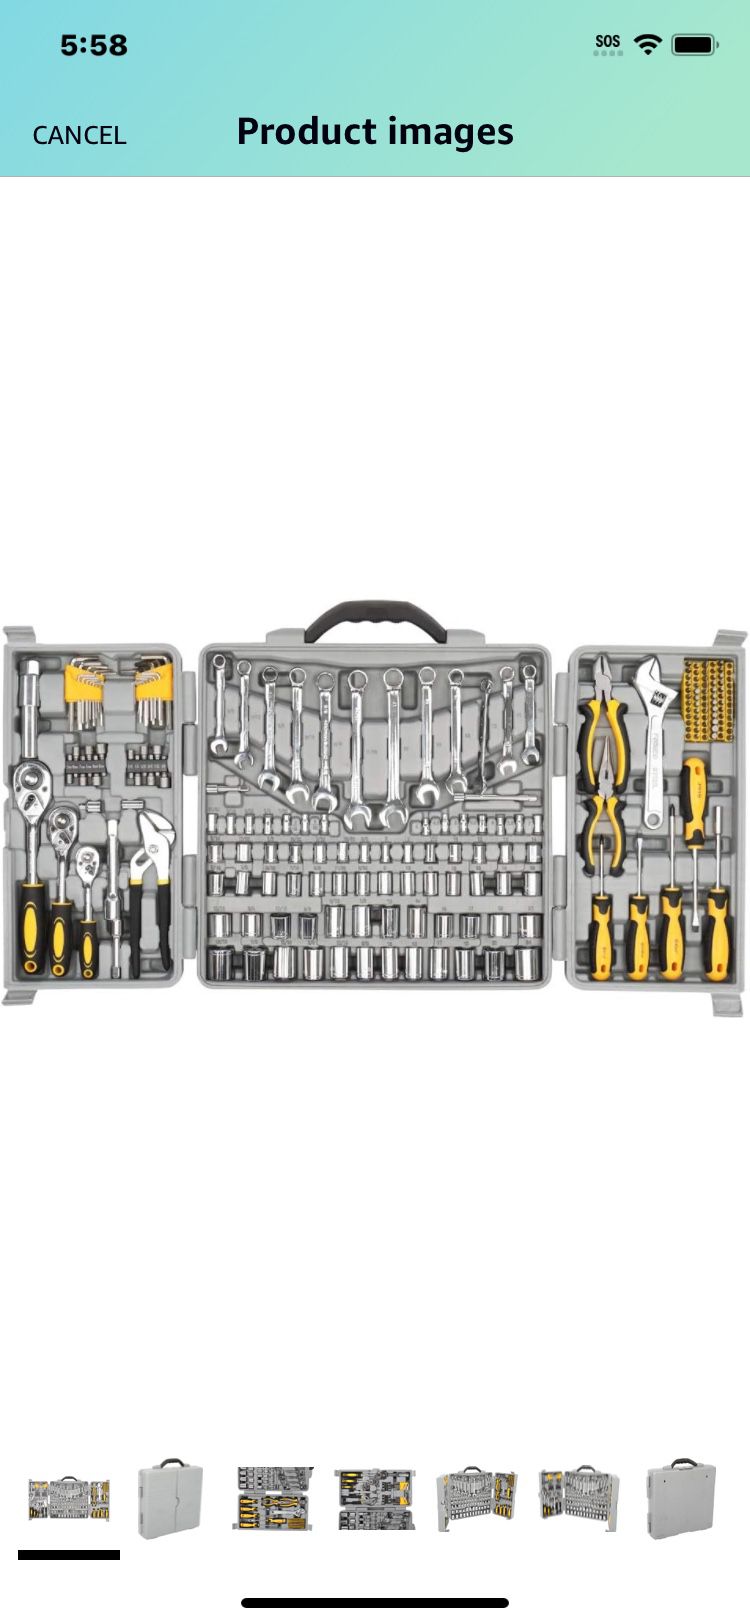 Brand New 205 Piece Tool Set Mechanics Tools Kit General Household Hand Tool Kit with Plastic Toolbox Storage Case Socket Wrench Set